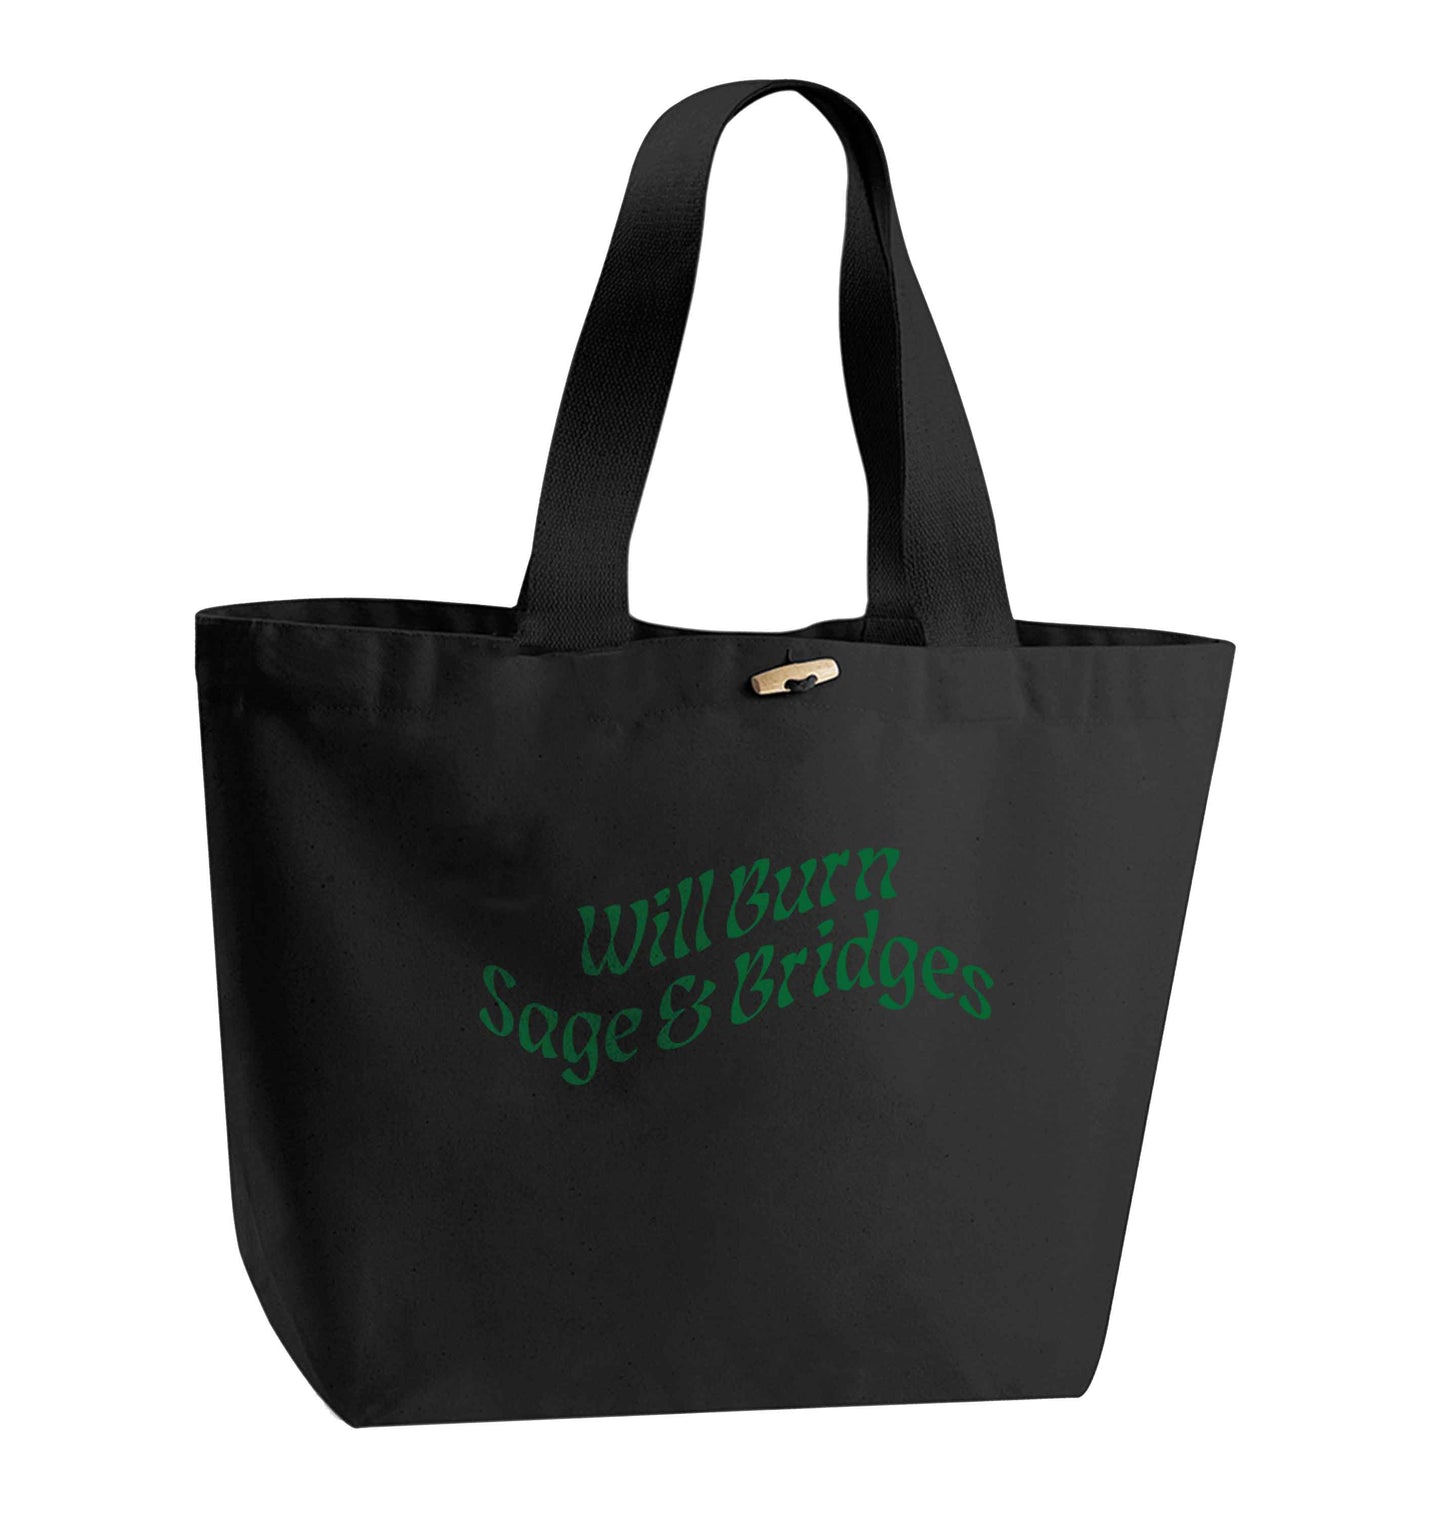 Will burn bridges and sage organic cotton premium tote bag with wooden toggle in black